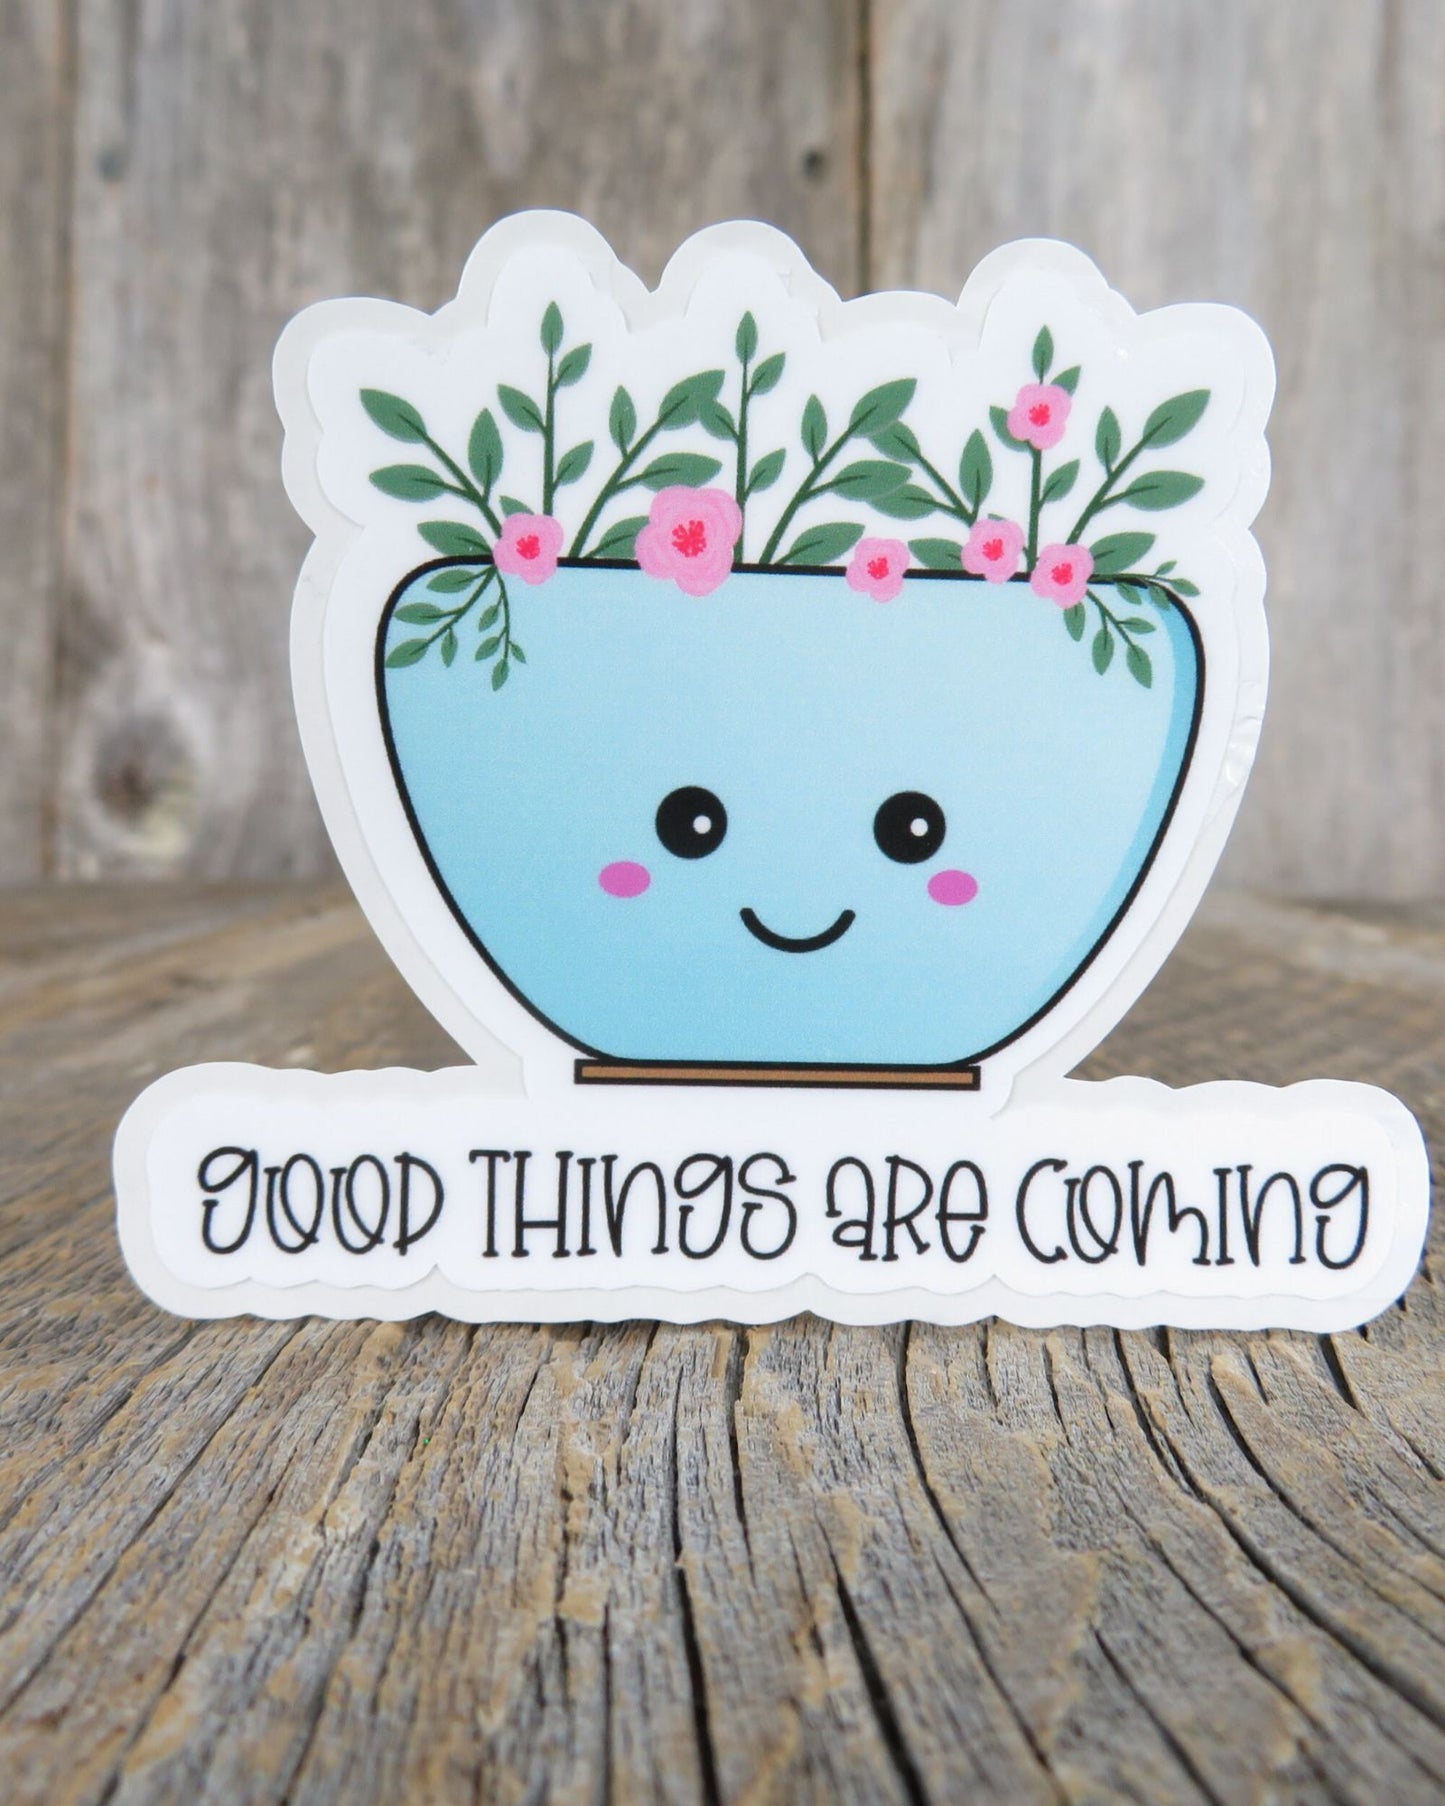 Good Things Are Coming Sticker Full Color Kawaii Plant Waterproof Positive Saying Water Bottle